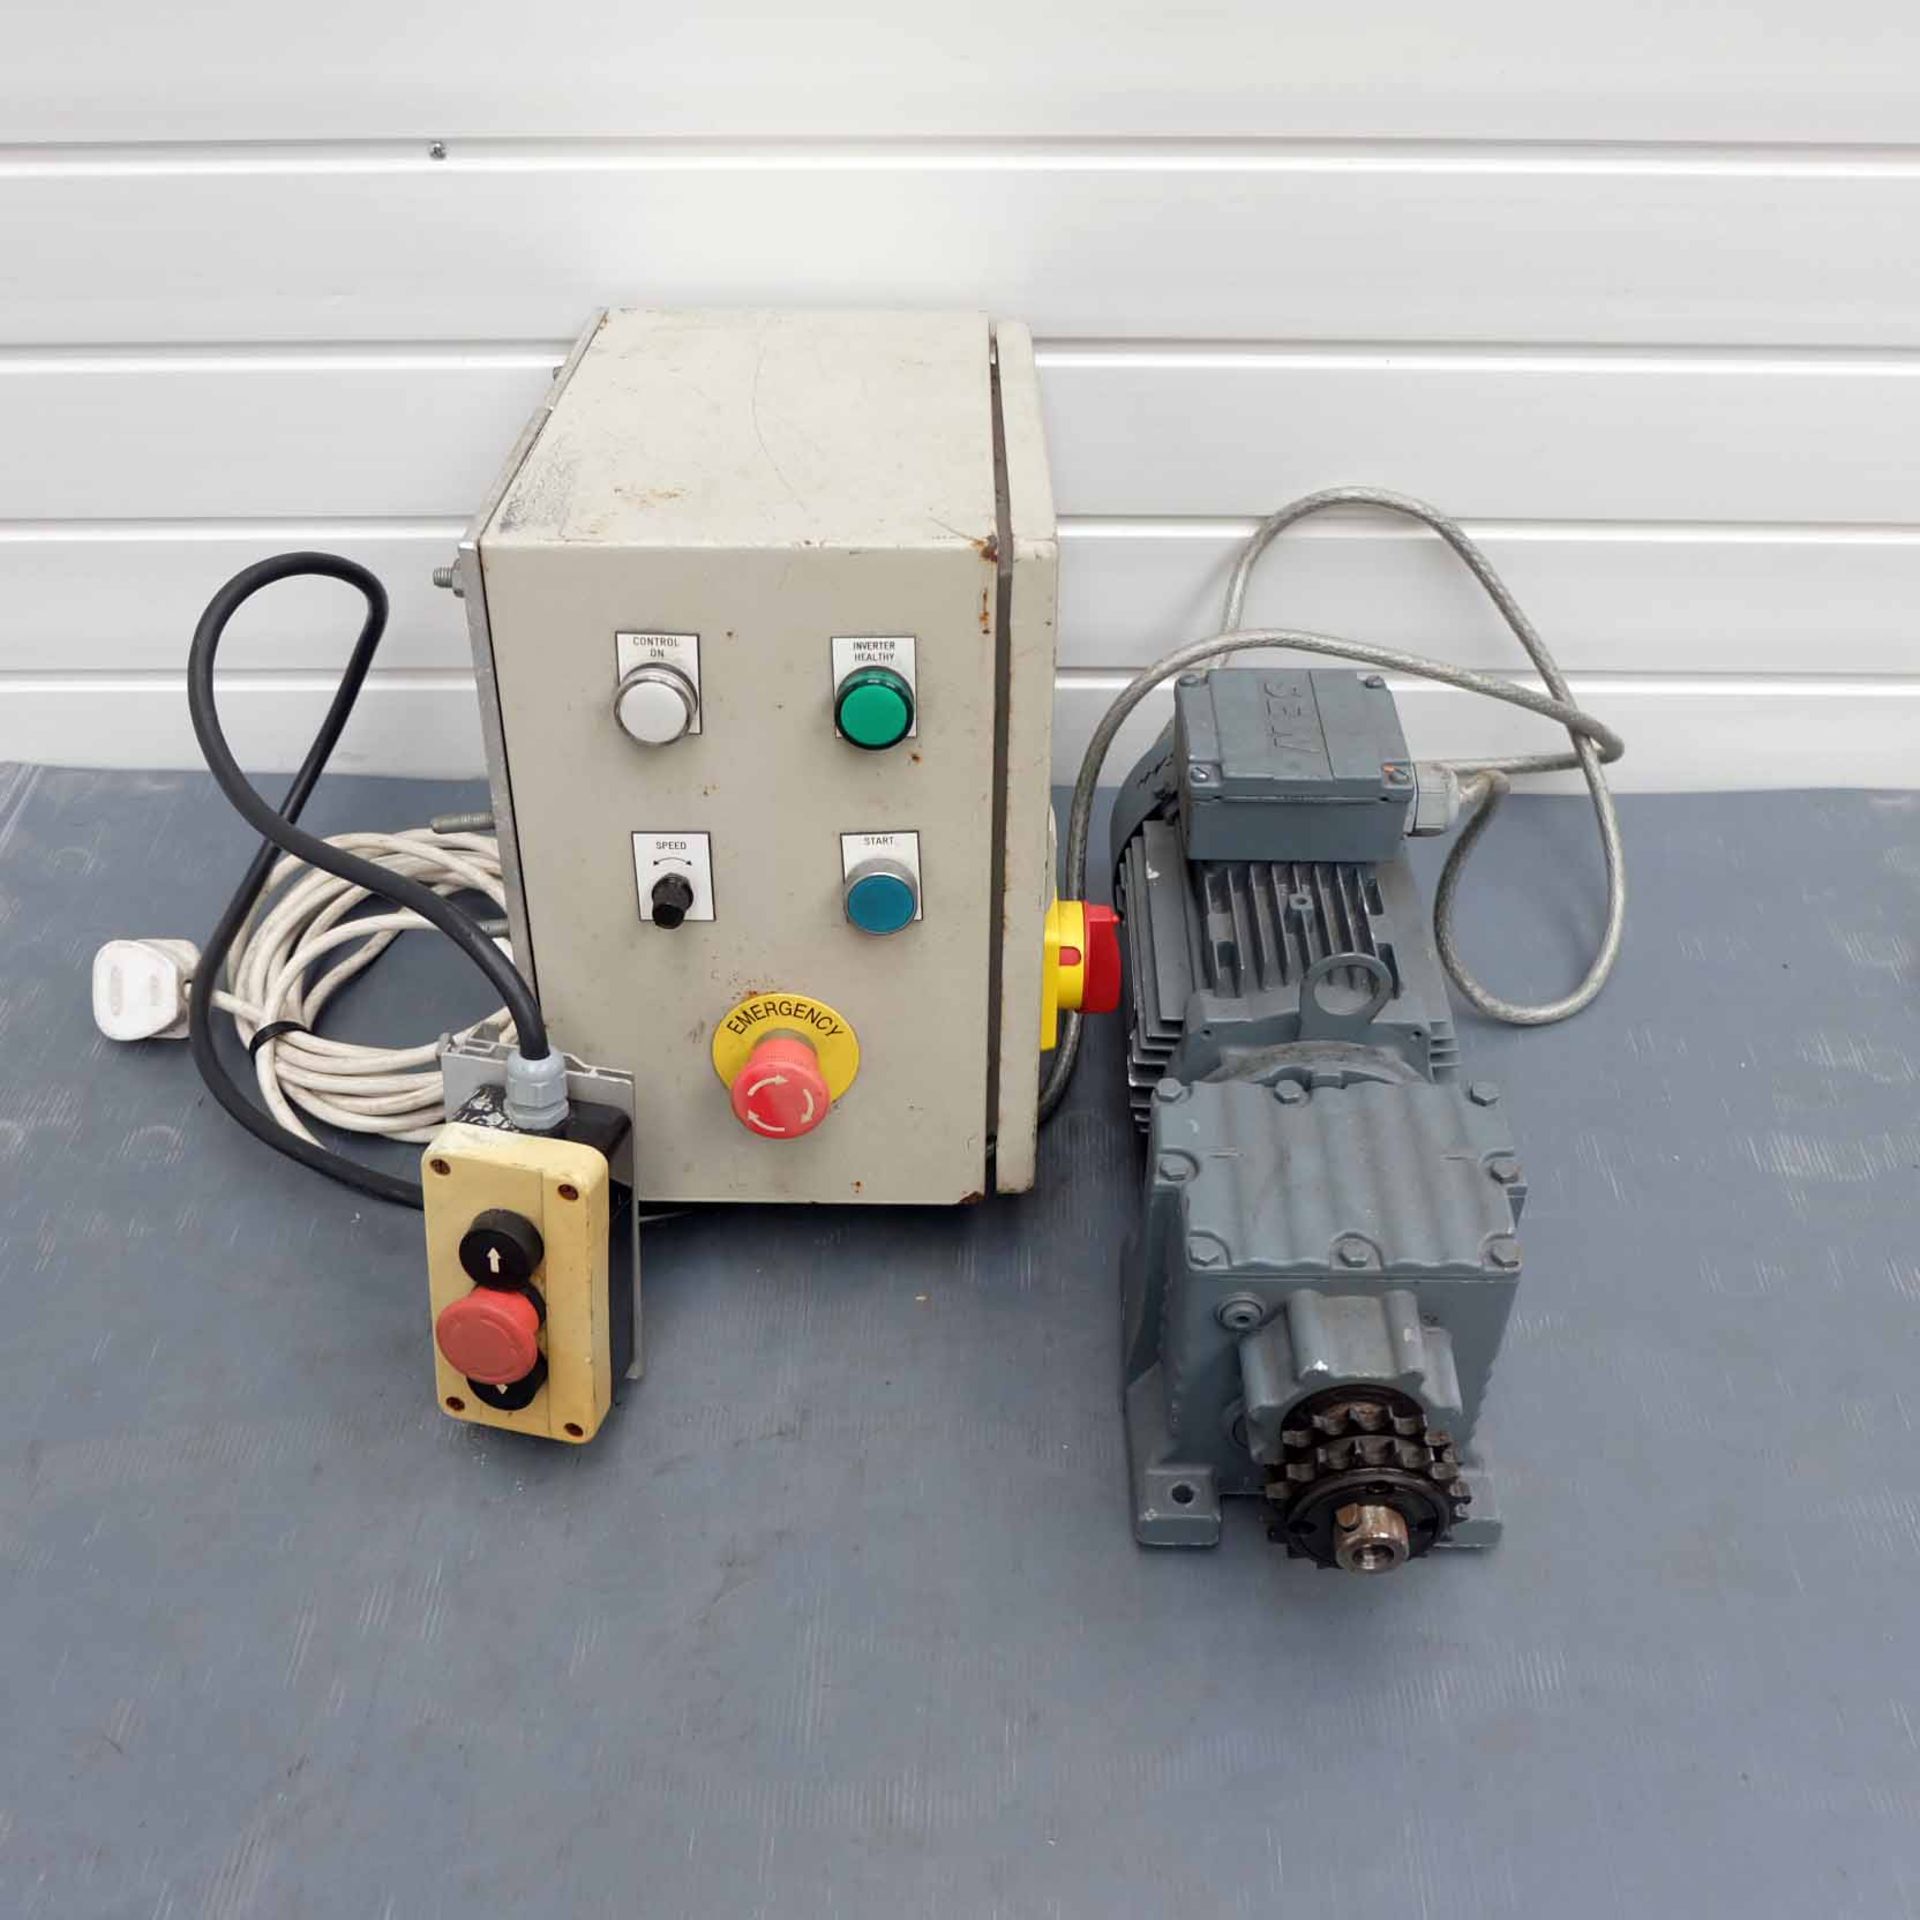 SEW Eurodrive Type R27 Motor & Gearbox With Electric Control Panel. Motor 0.55KW-S1.